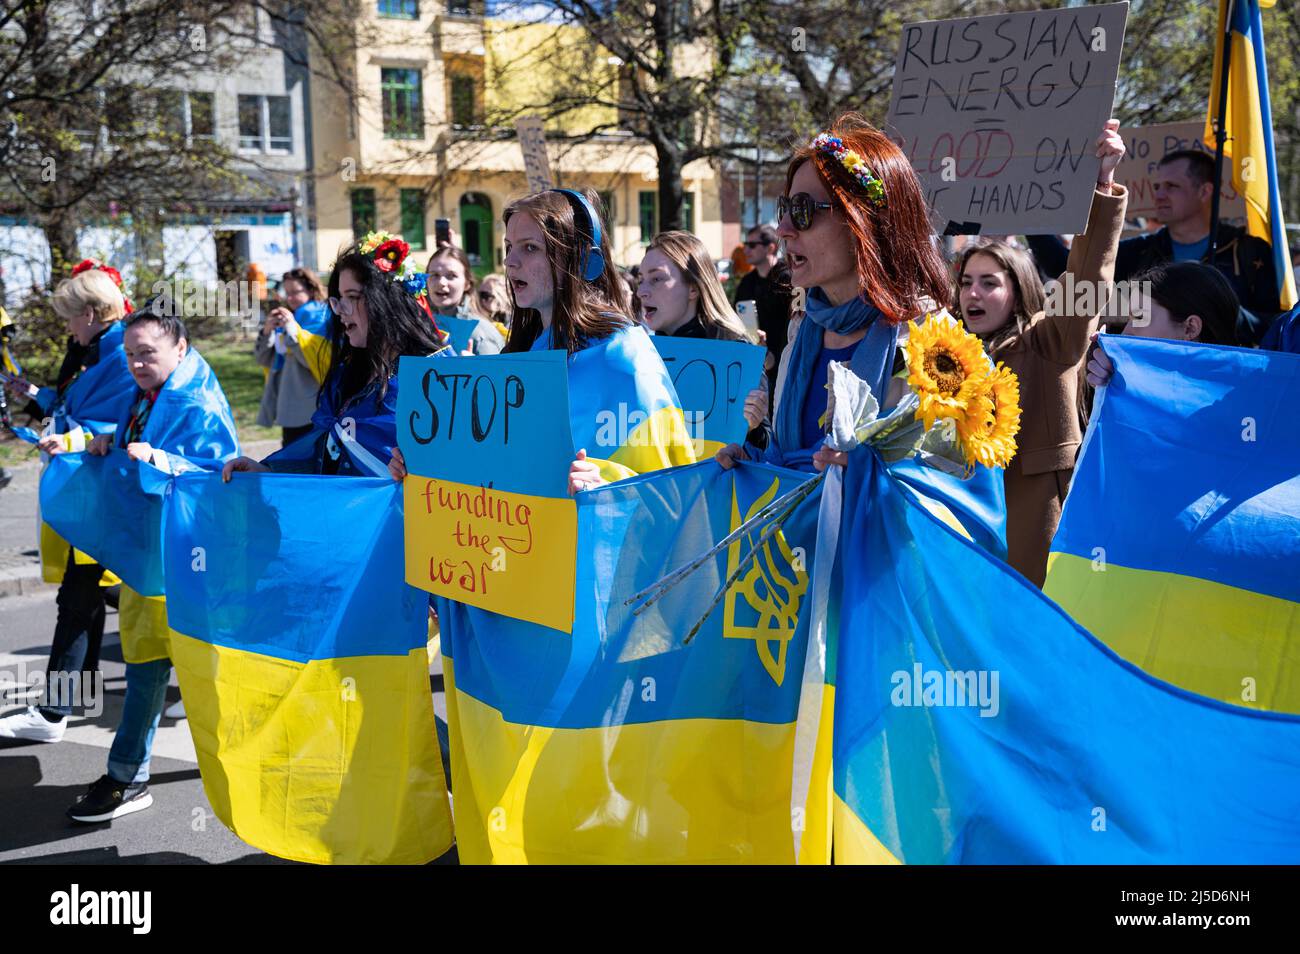 '04/16/2022, Berlin, Germany, Europe - Ukrainian women protest during a demonstration under the slogan ''March for true Peace in Ukraine'' as part of the alternative Easter March, which is directed against Russian military aggression in the two wars in Ukraine and Syria. The demonstrators demand further sanctions against Russia and more support from the West in the form of defensive weapons, as well as the immediate boycott of energy imports from Russia such as oil and gas. [automated translation]' Stock Photo